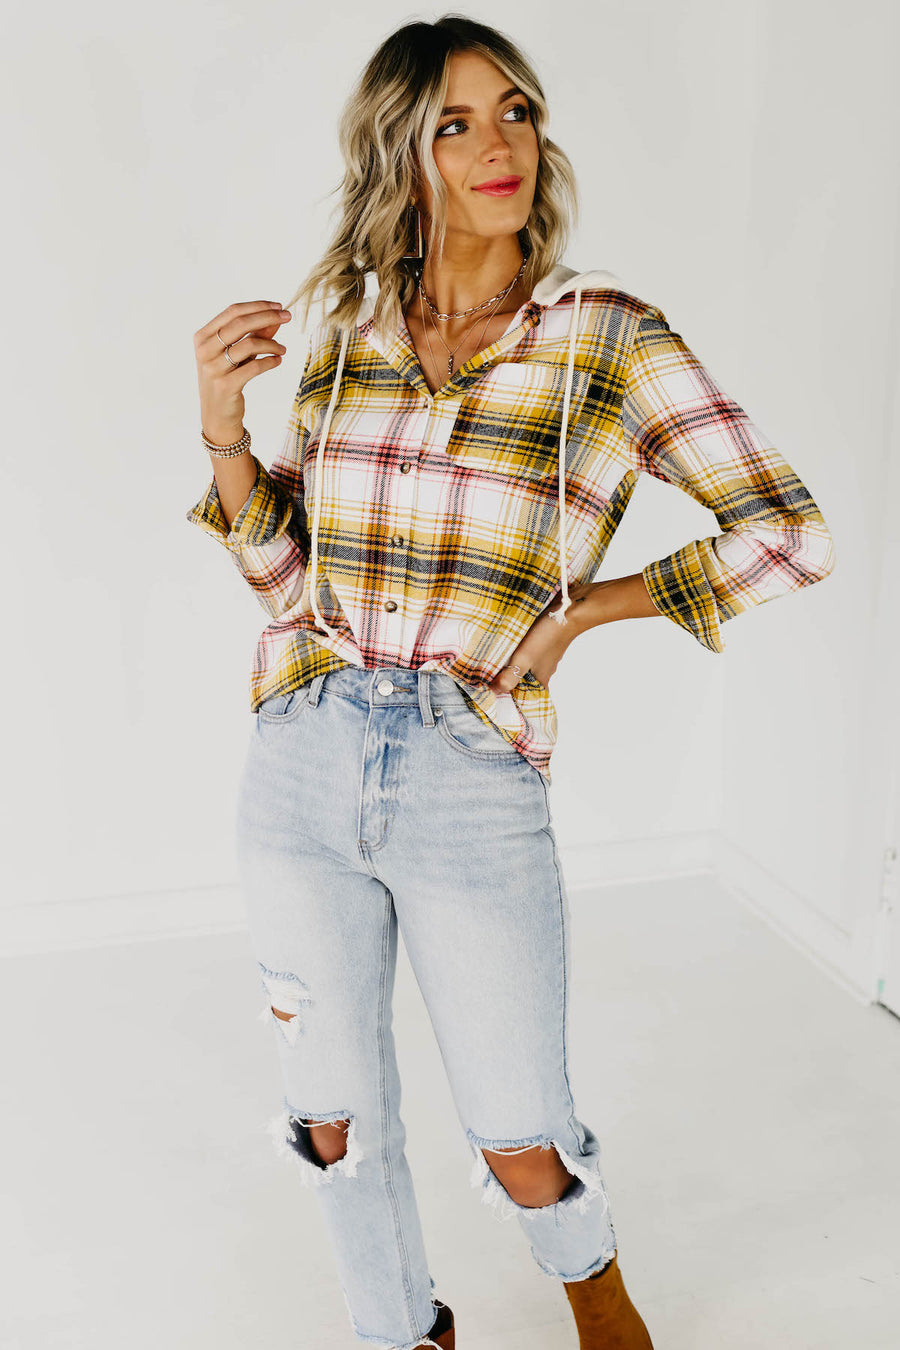 The Trista Plaid Hooded Top - Yellow Multi